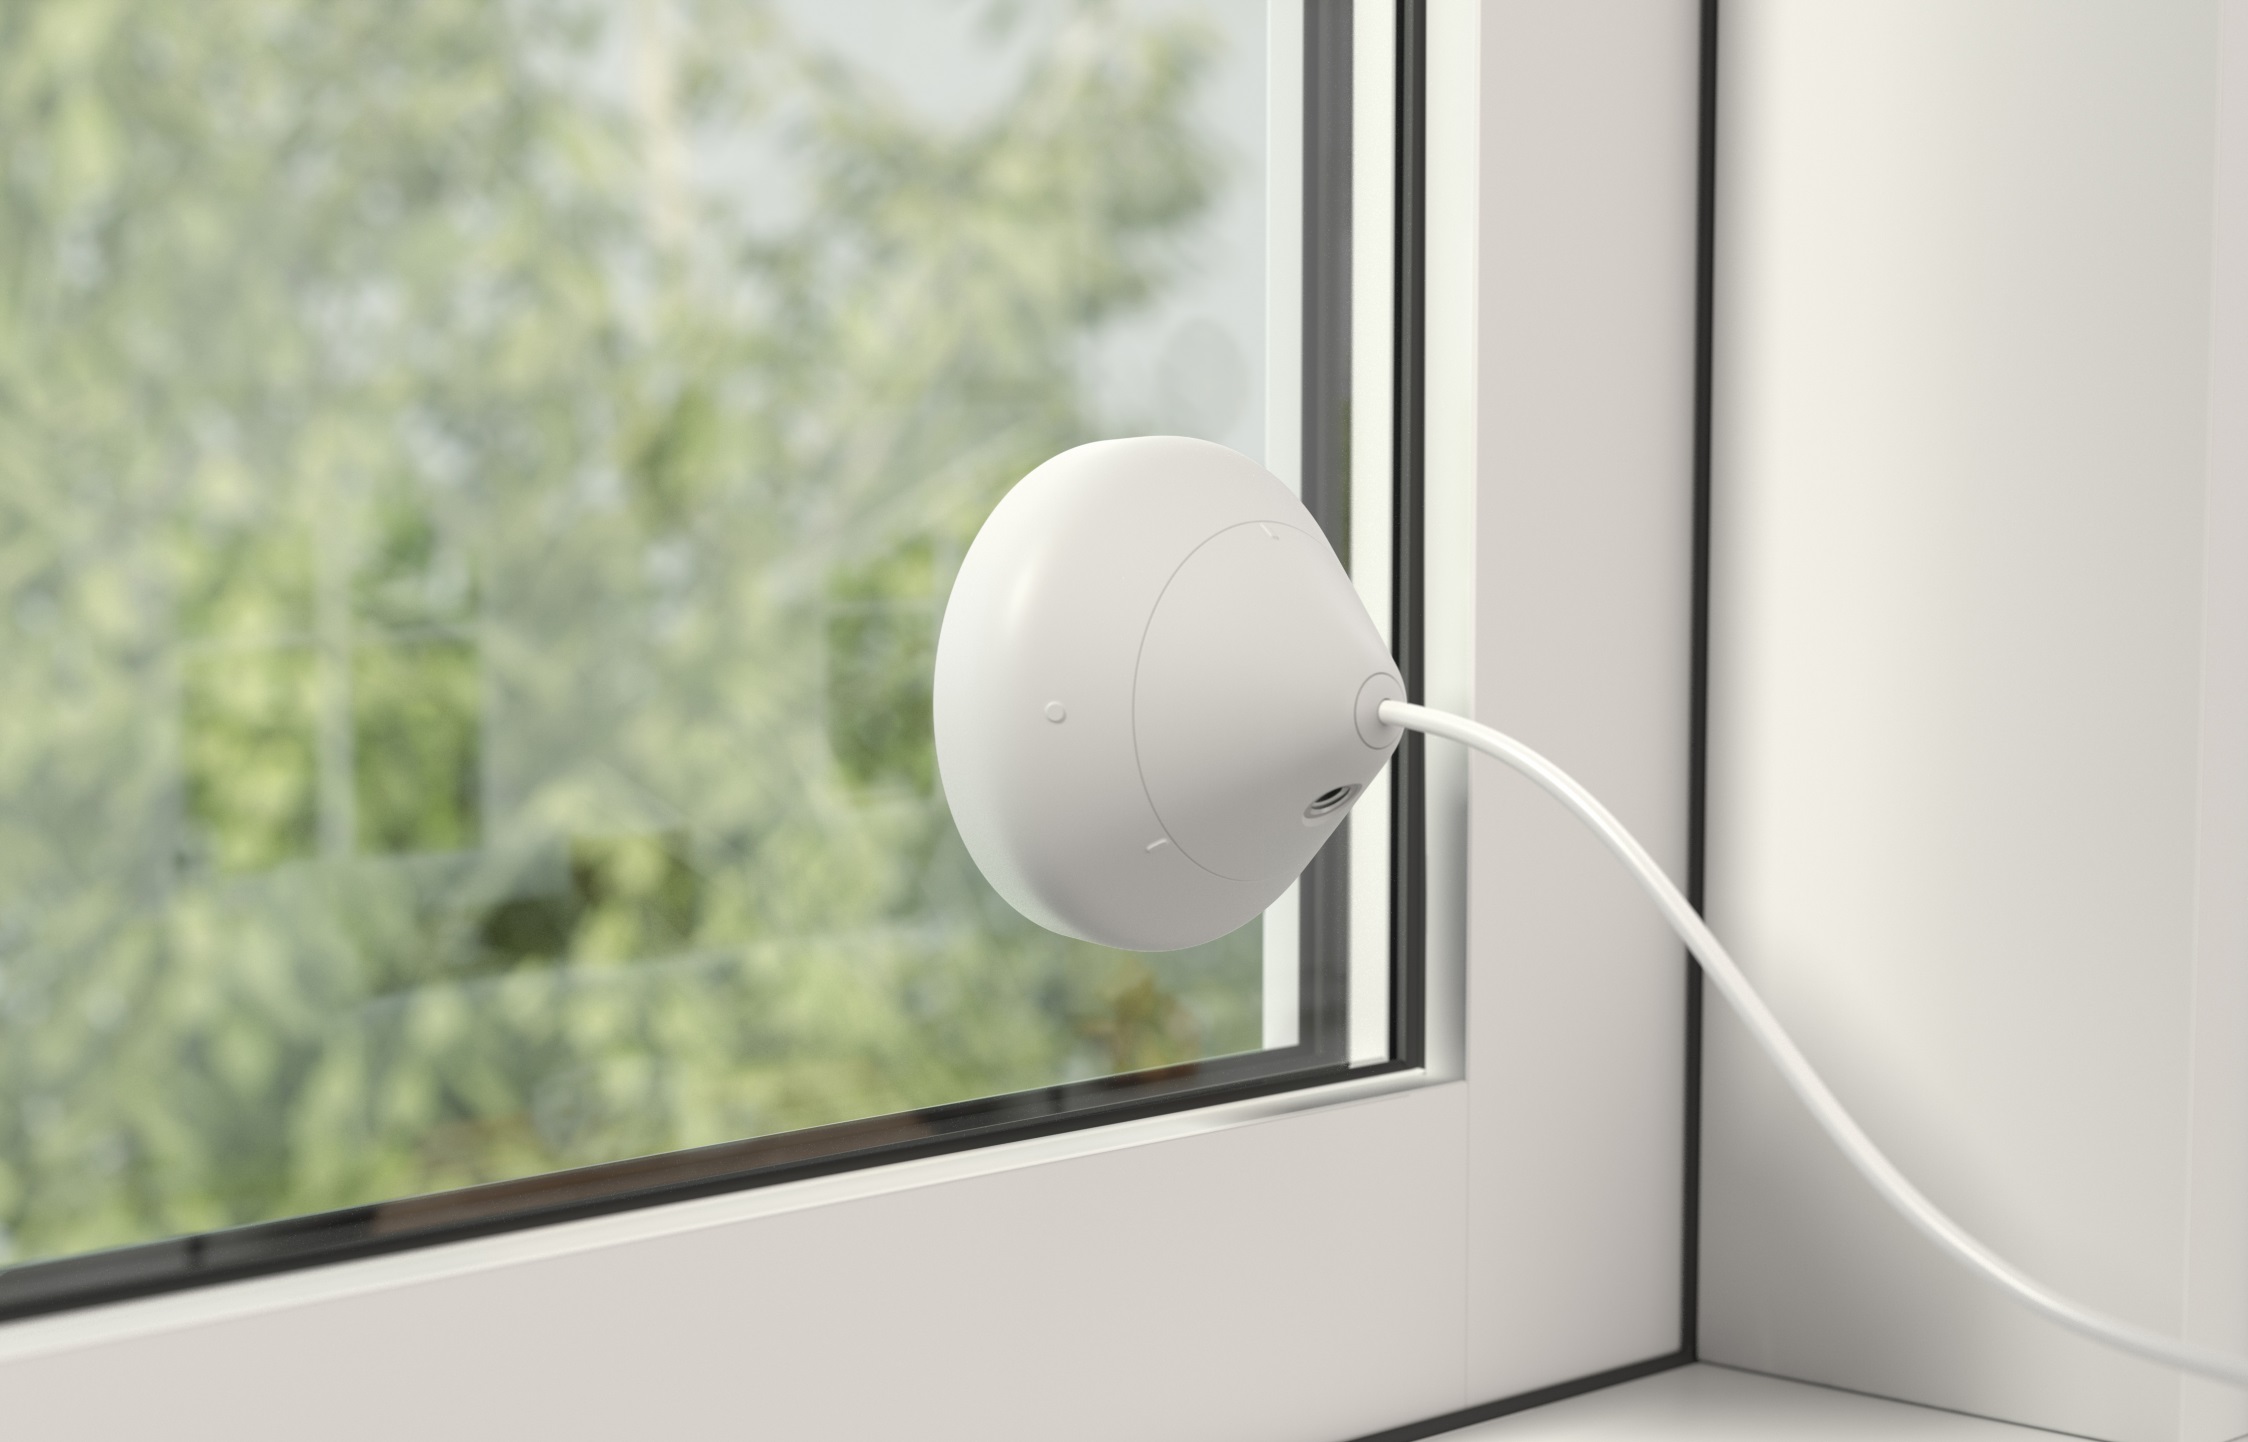 Logitech Circle 2 mounted in a window facing the outdoors.